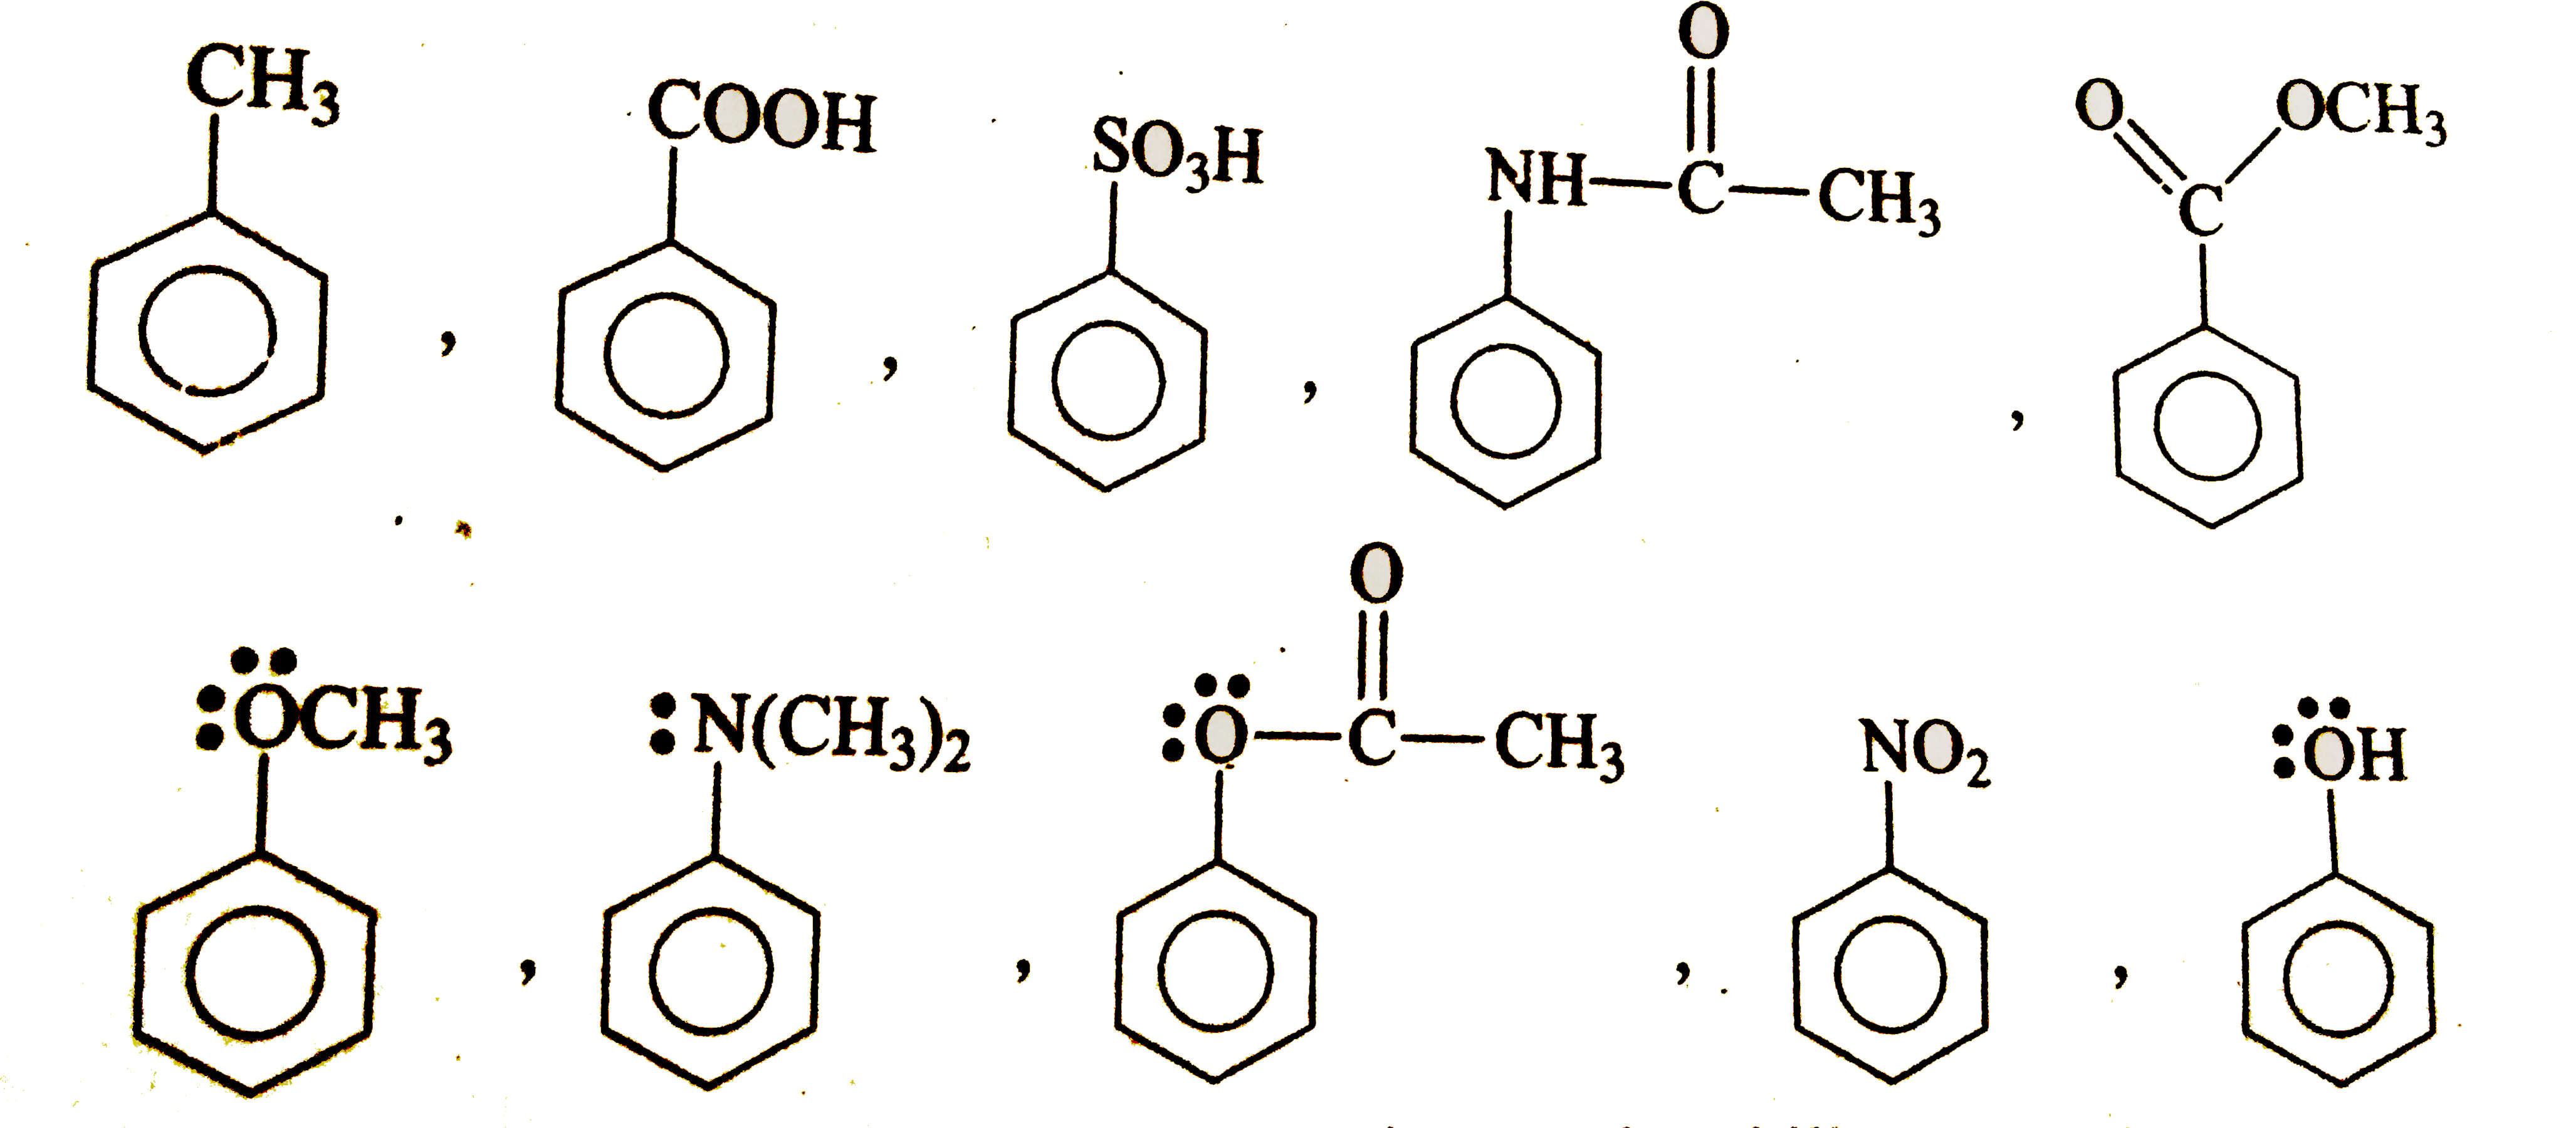 Examine the structural formula shown  below  and find out  how many  compounds   undergo electrophilic  nitration more rapidly  than flouro benzene.